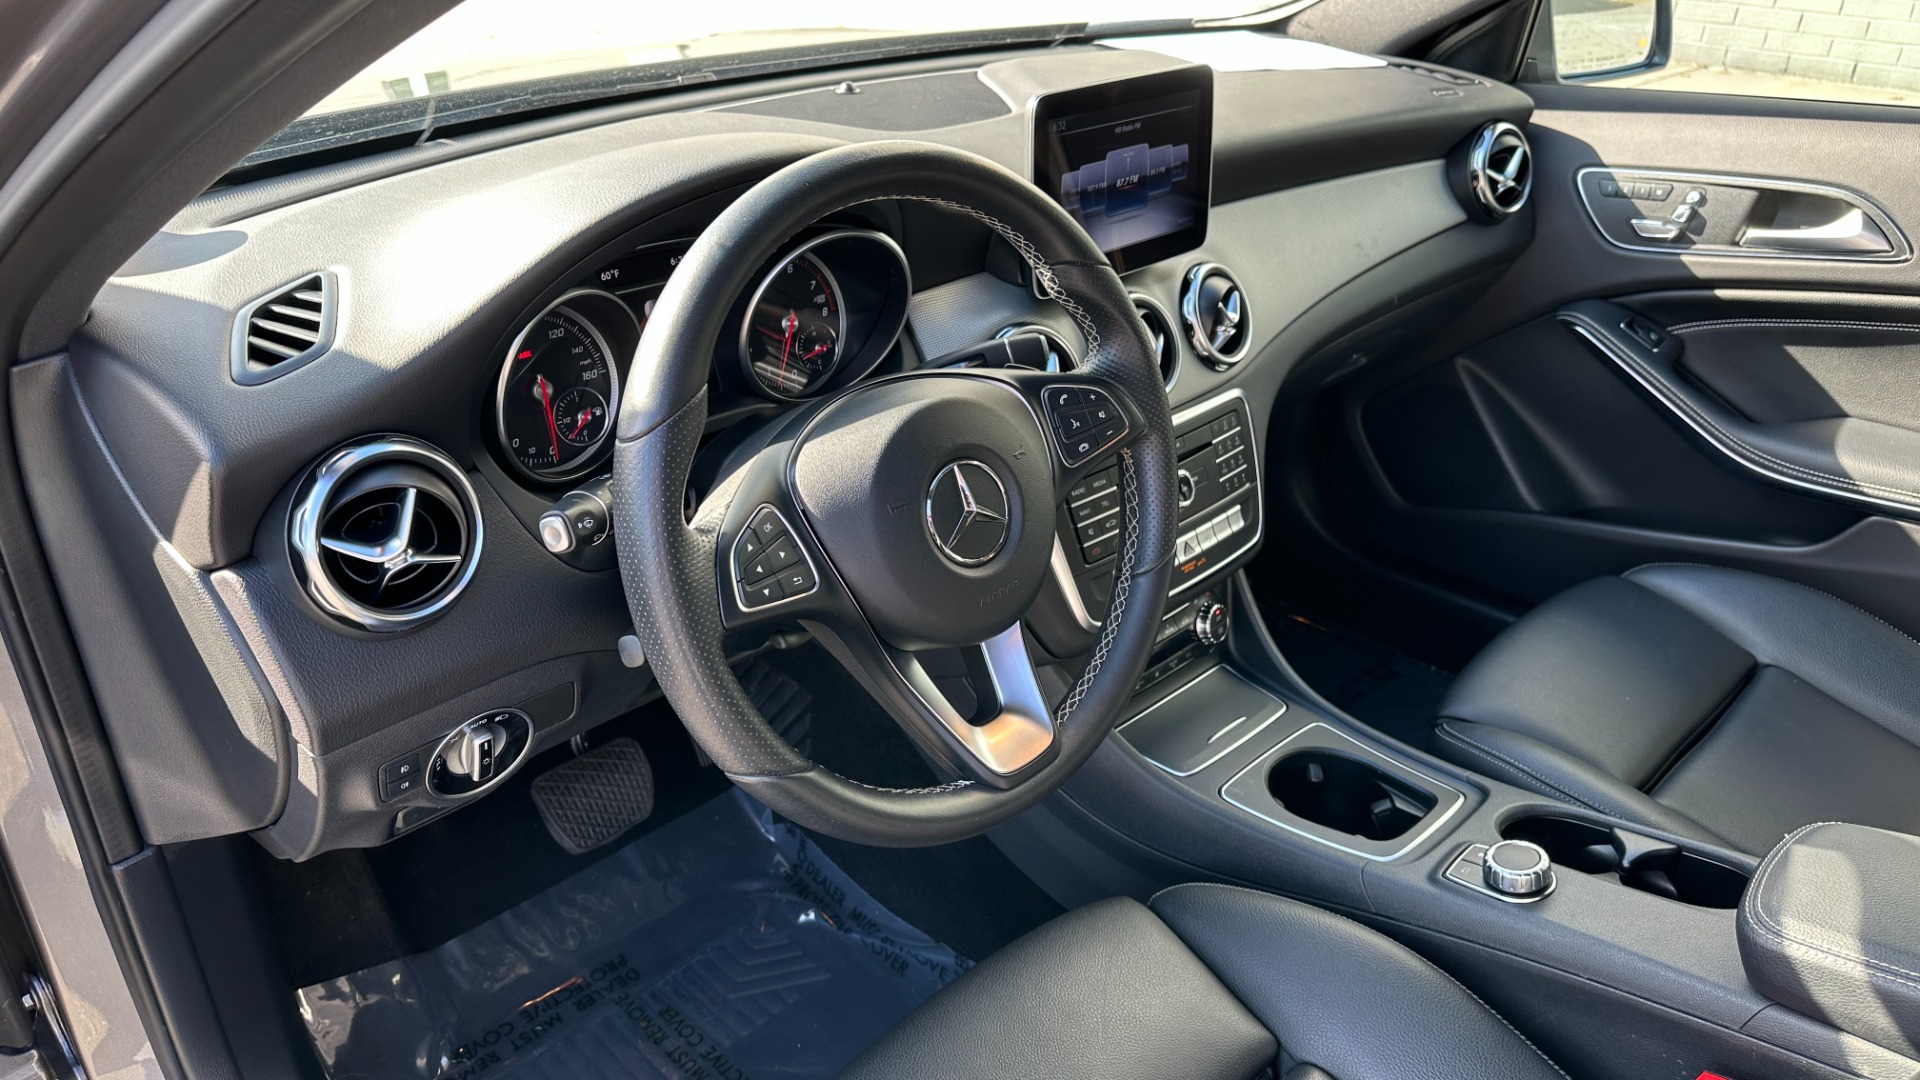 Used 2018 Mercedes-Benz GLA GLA 250 / PANORAMIC SUNROOF / BLIND SPOT ASSIST / HEATED FRONT SEATS for sale $27,999 at Formula Imports in Charlotte NC 28227 11